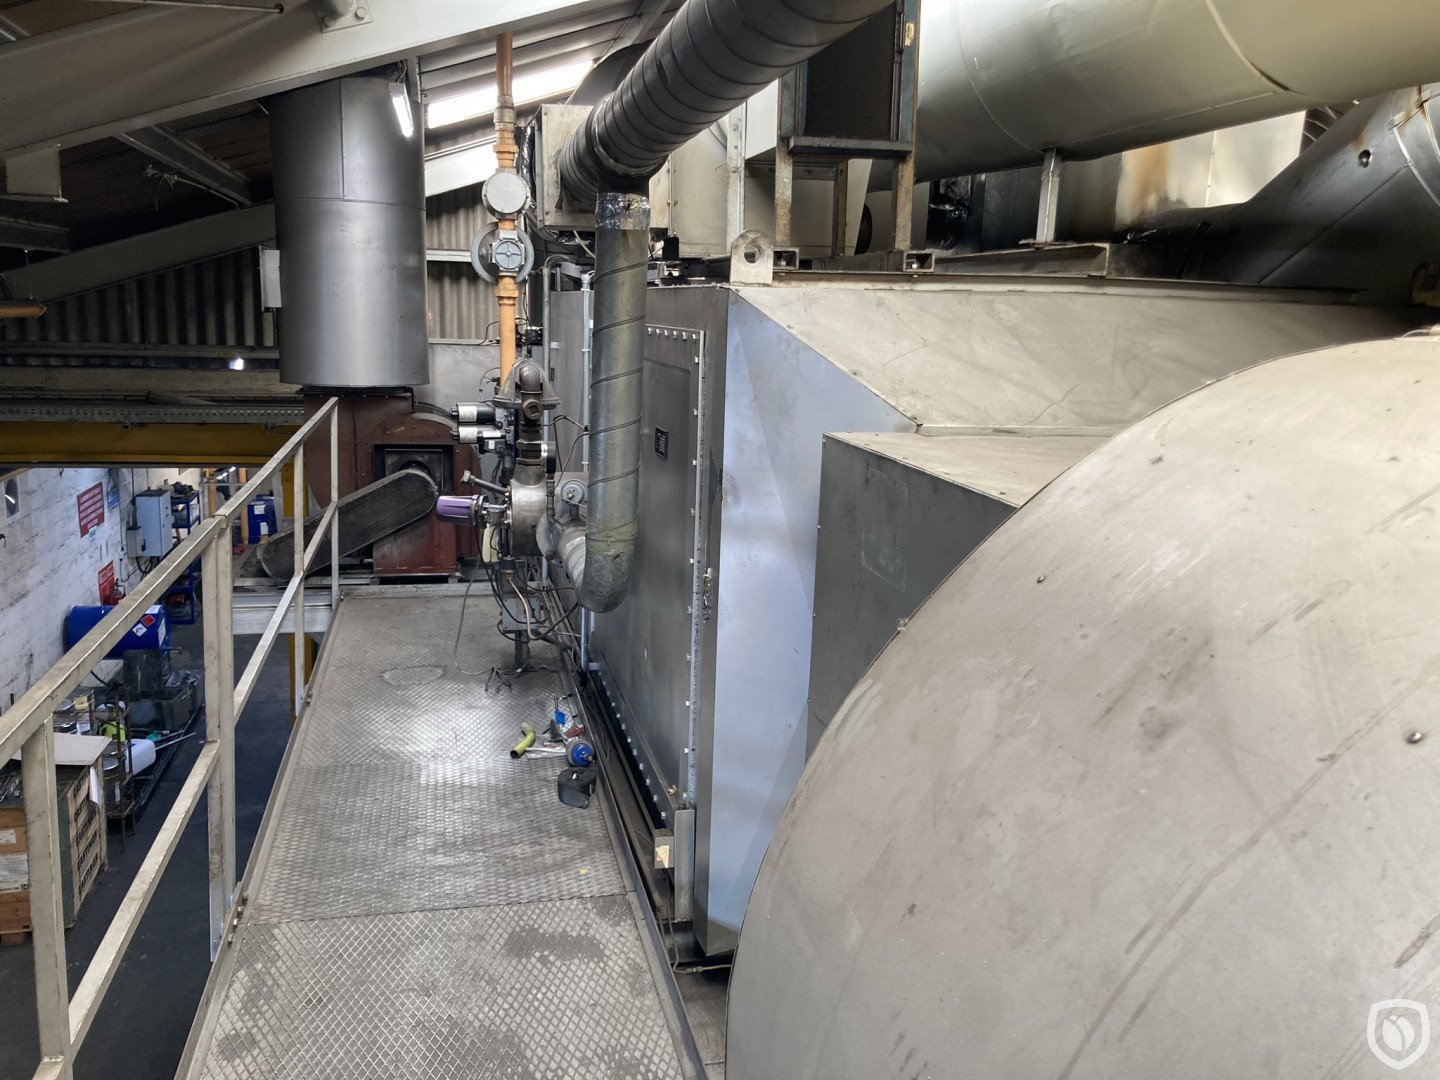 FUJI-C451 coating line with 28 meter LTG tunnel-oven